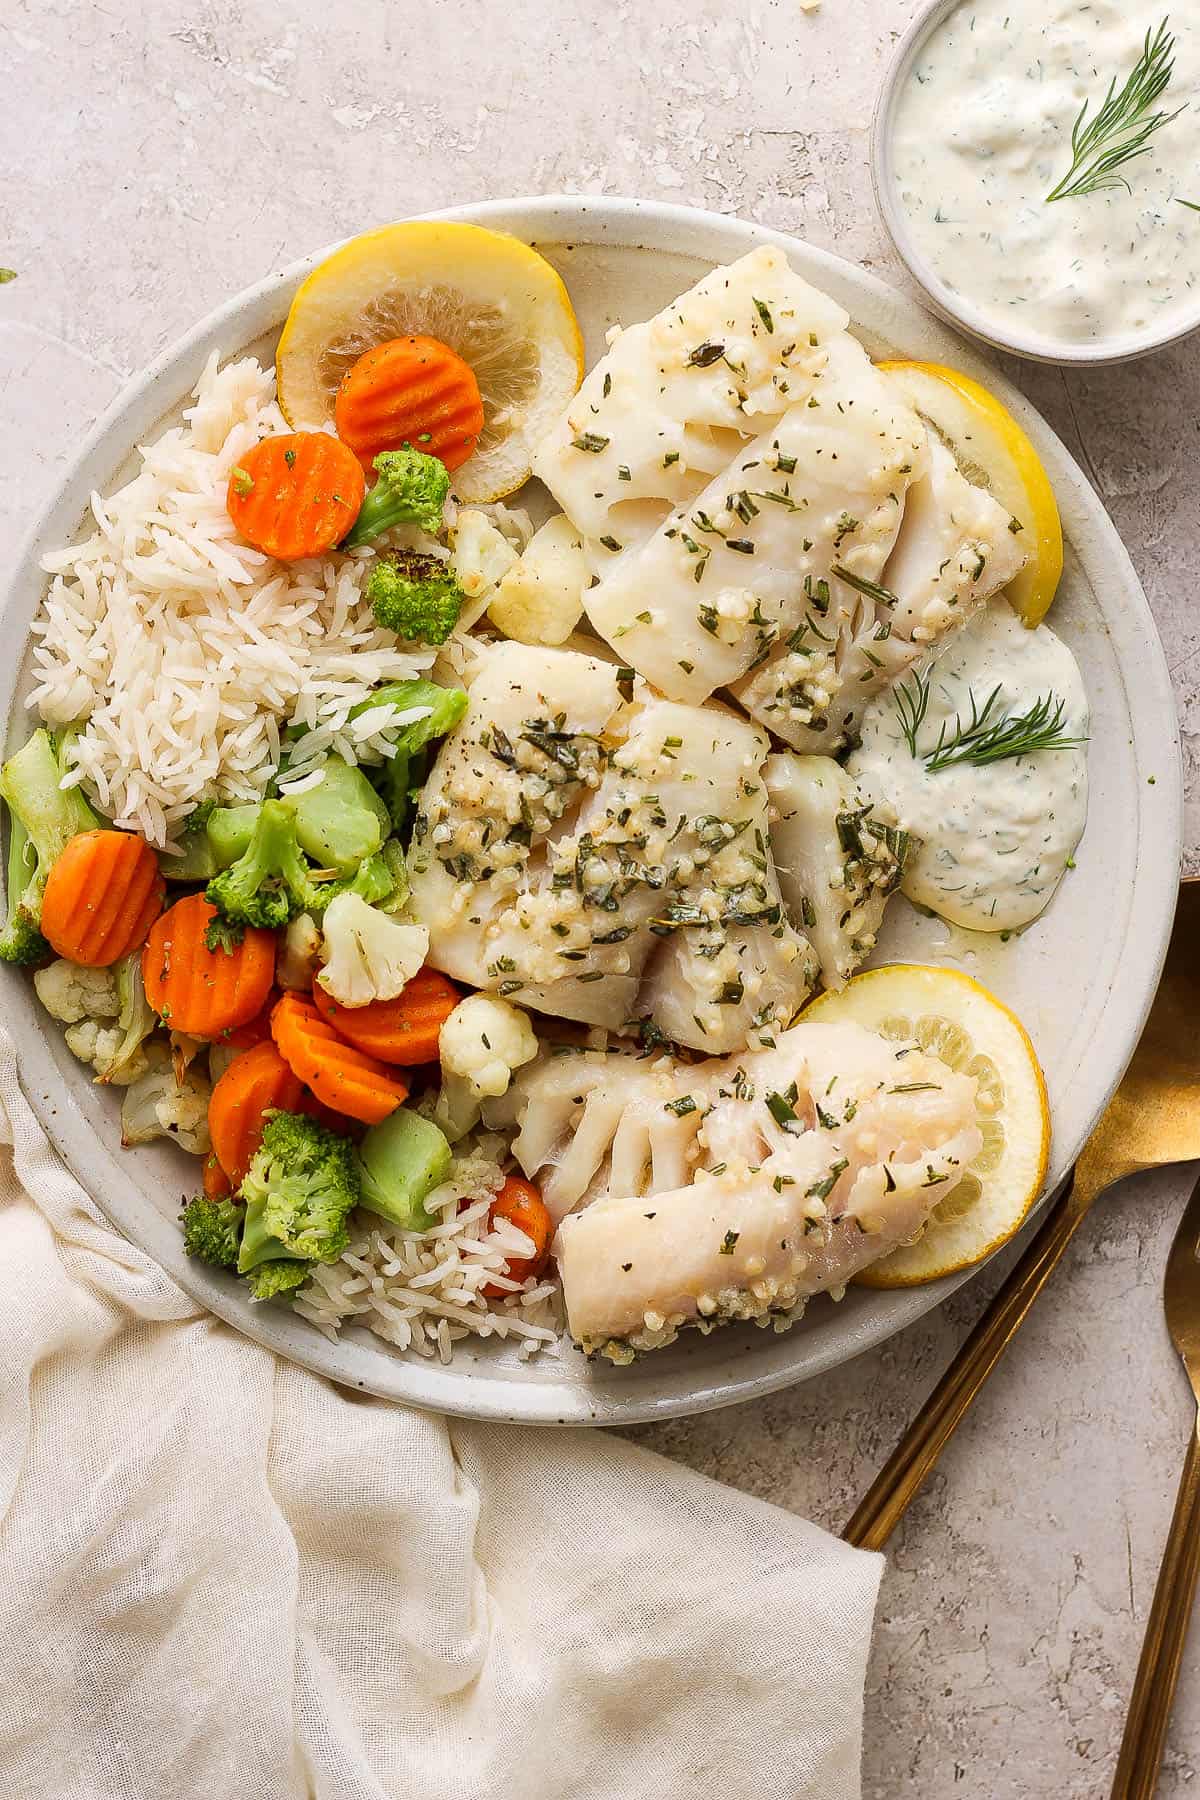 A dinner plate with baked cod, lemon slices, roasted veggies, and rice.